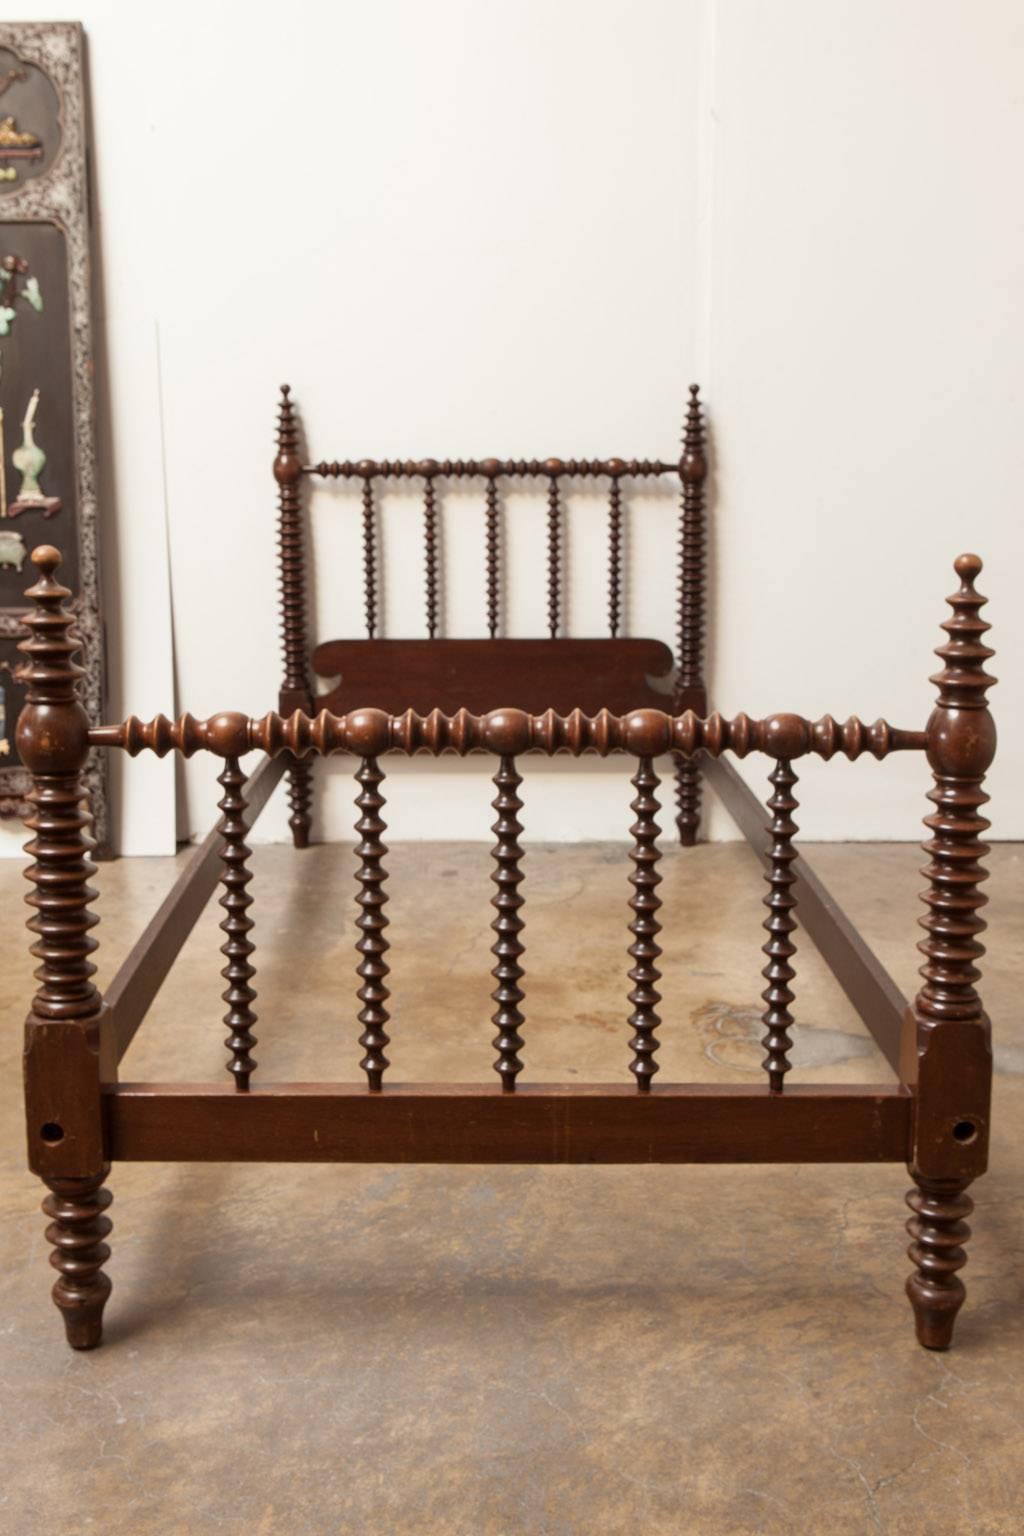 Matched pair of Mahogany spool beds made in the Jenny Lind style featuring lovely turned spindle columns with graduated finials and toupie feet. Headboard and footboard are mortised to the end rails and the finish is original with minor scratches in